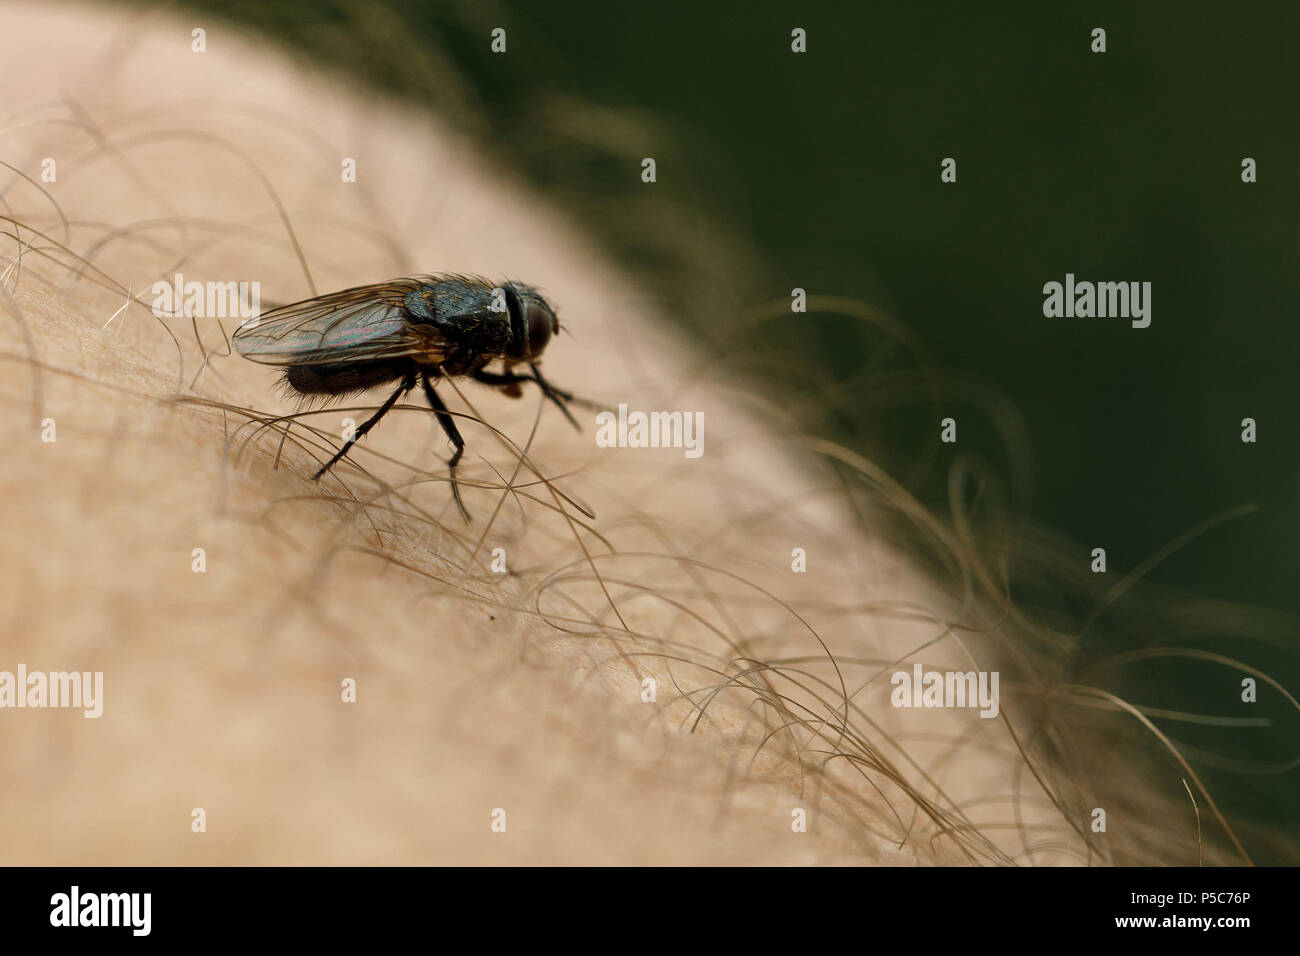 fly sits on human skin. Stock Photo